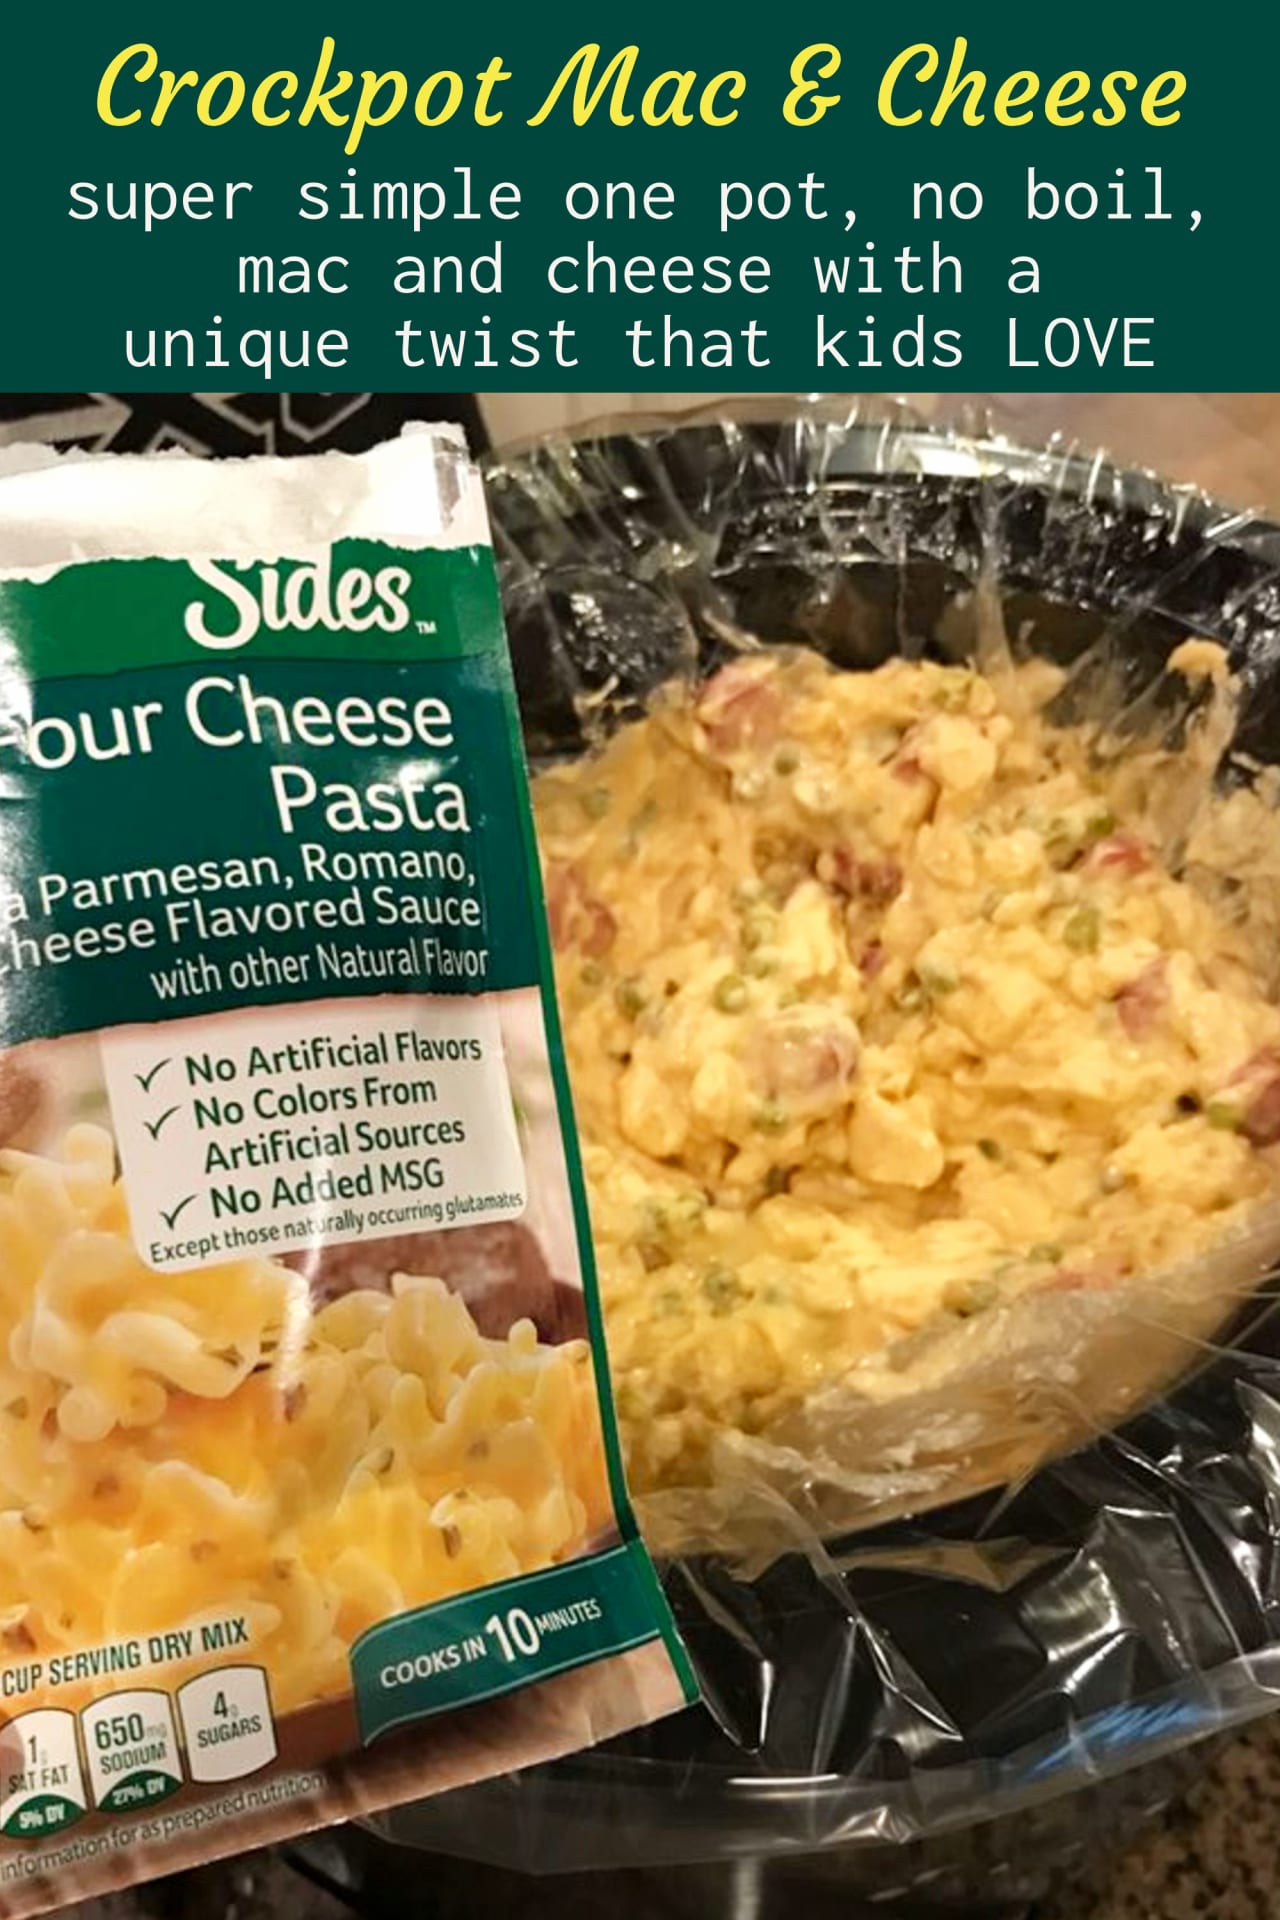 Crockpot mac and cheese recipes - easy one pot crockpot mac and cheese with no boil pasta, velveeta cheese and with / without milk. Best quick and easy crockpot mac and cheese recipes that would make Paula Deen jealous! Perfect for families dinners with picky eaters too!